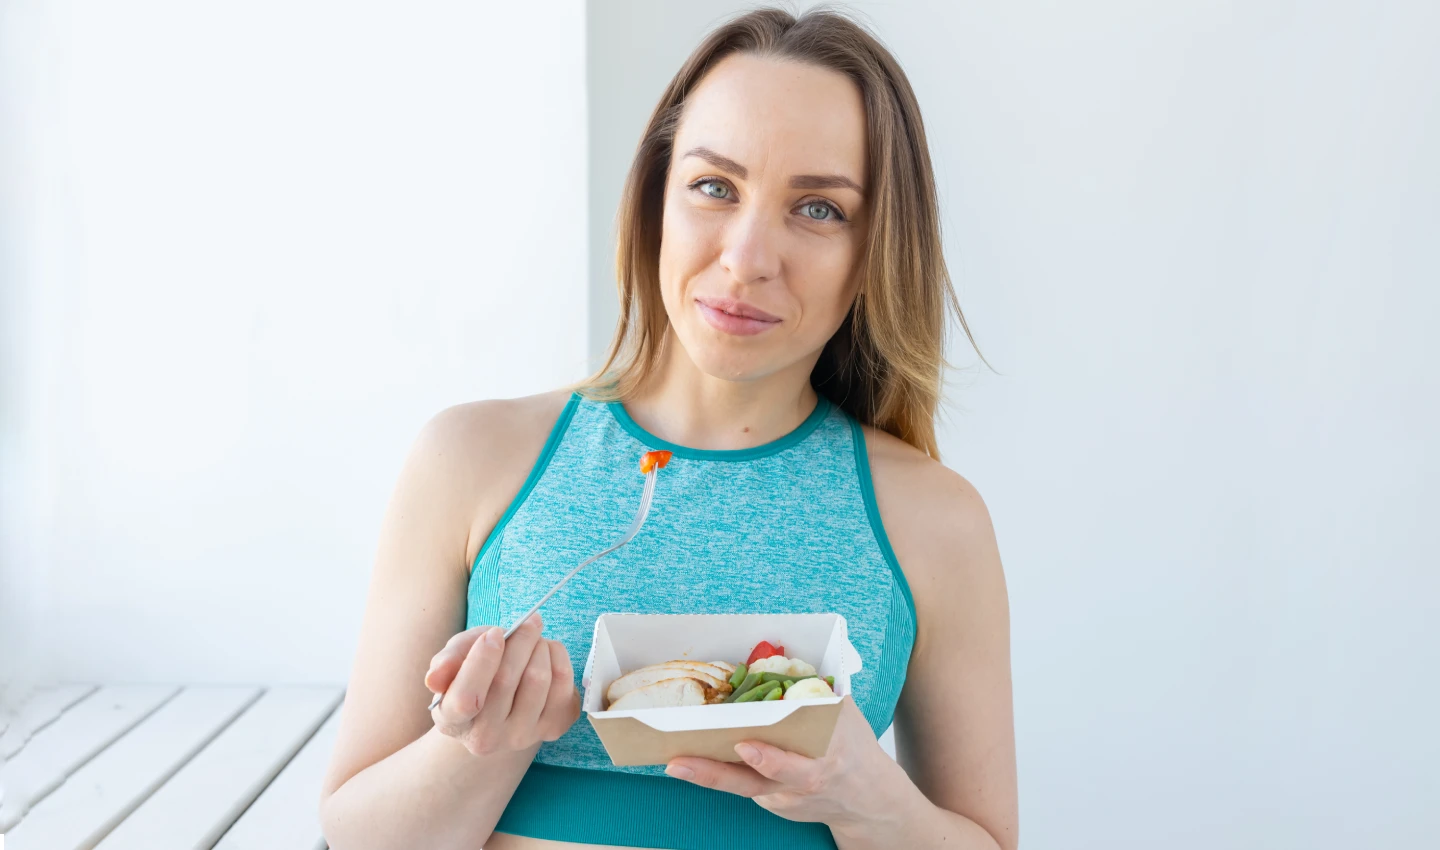 A woman smiles while eating healthy food, highlighting the importance of pre-operative diet for body surgery.